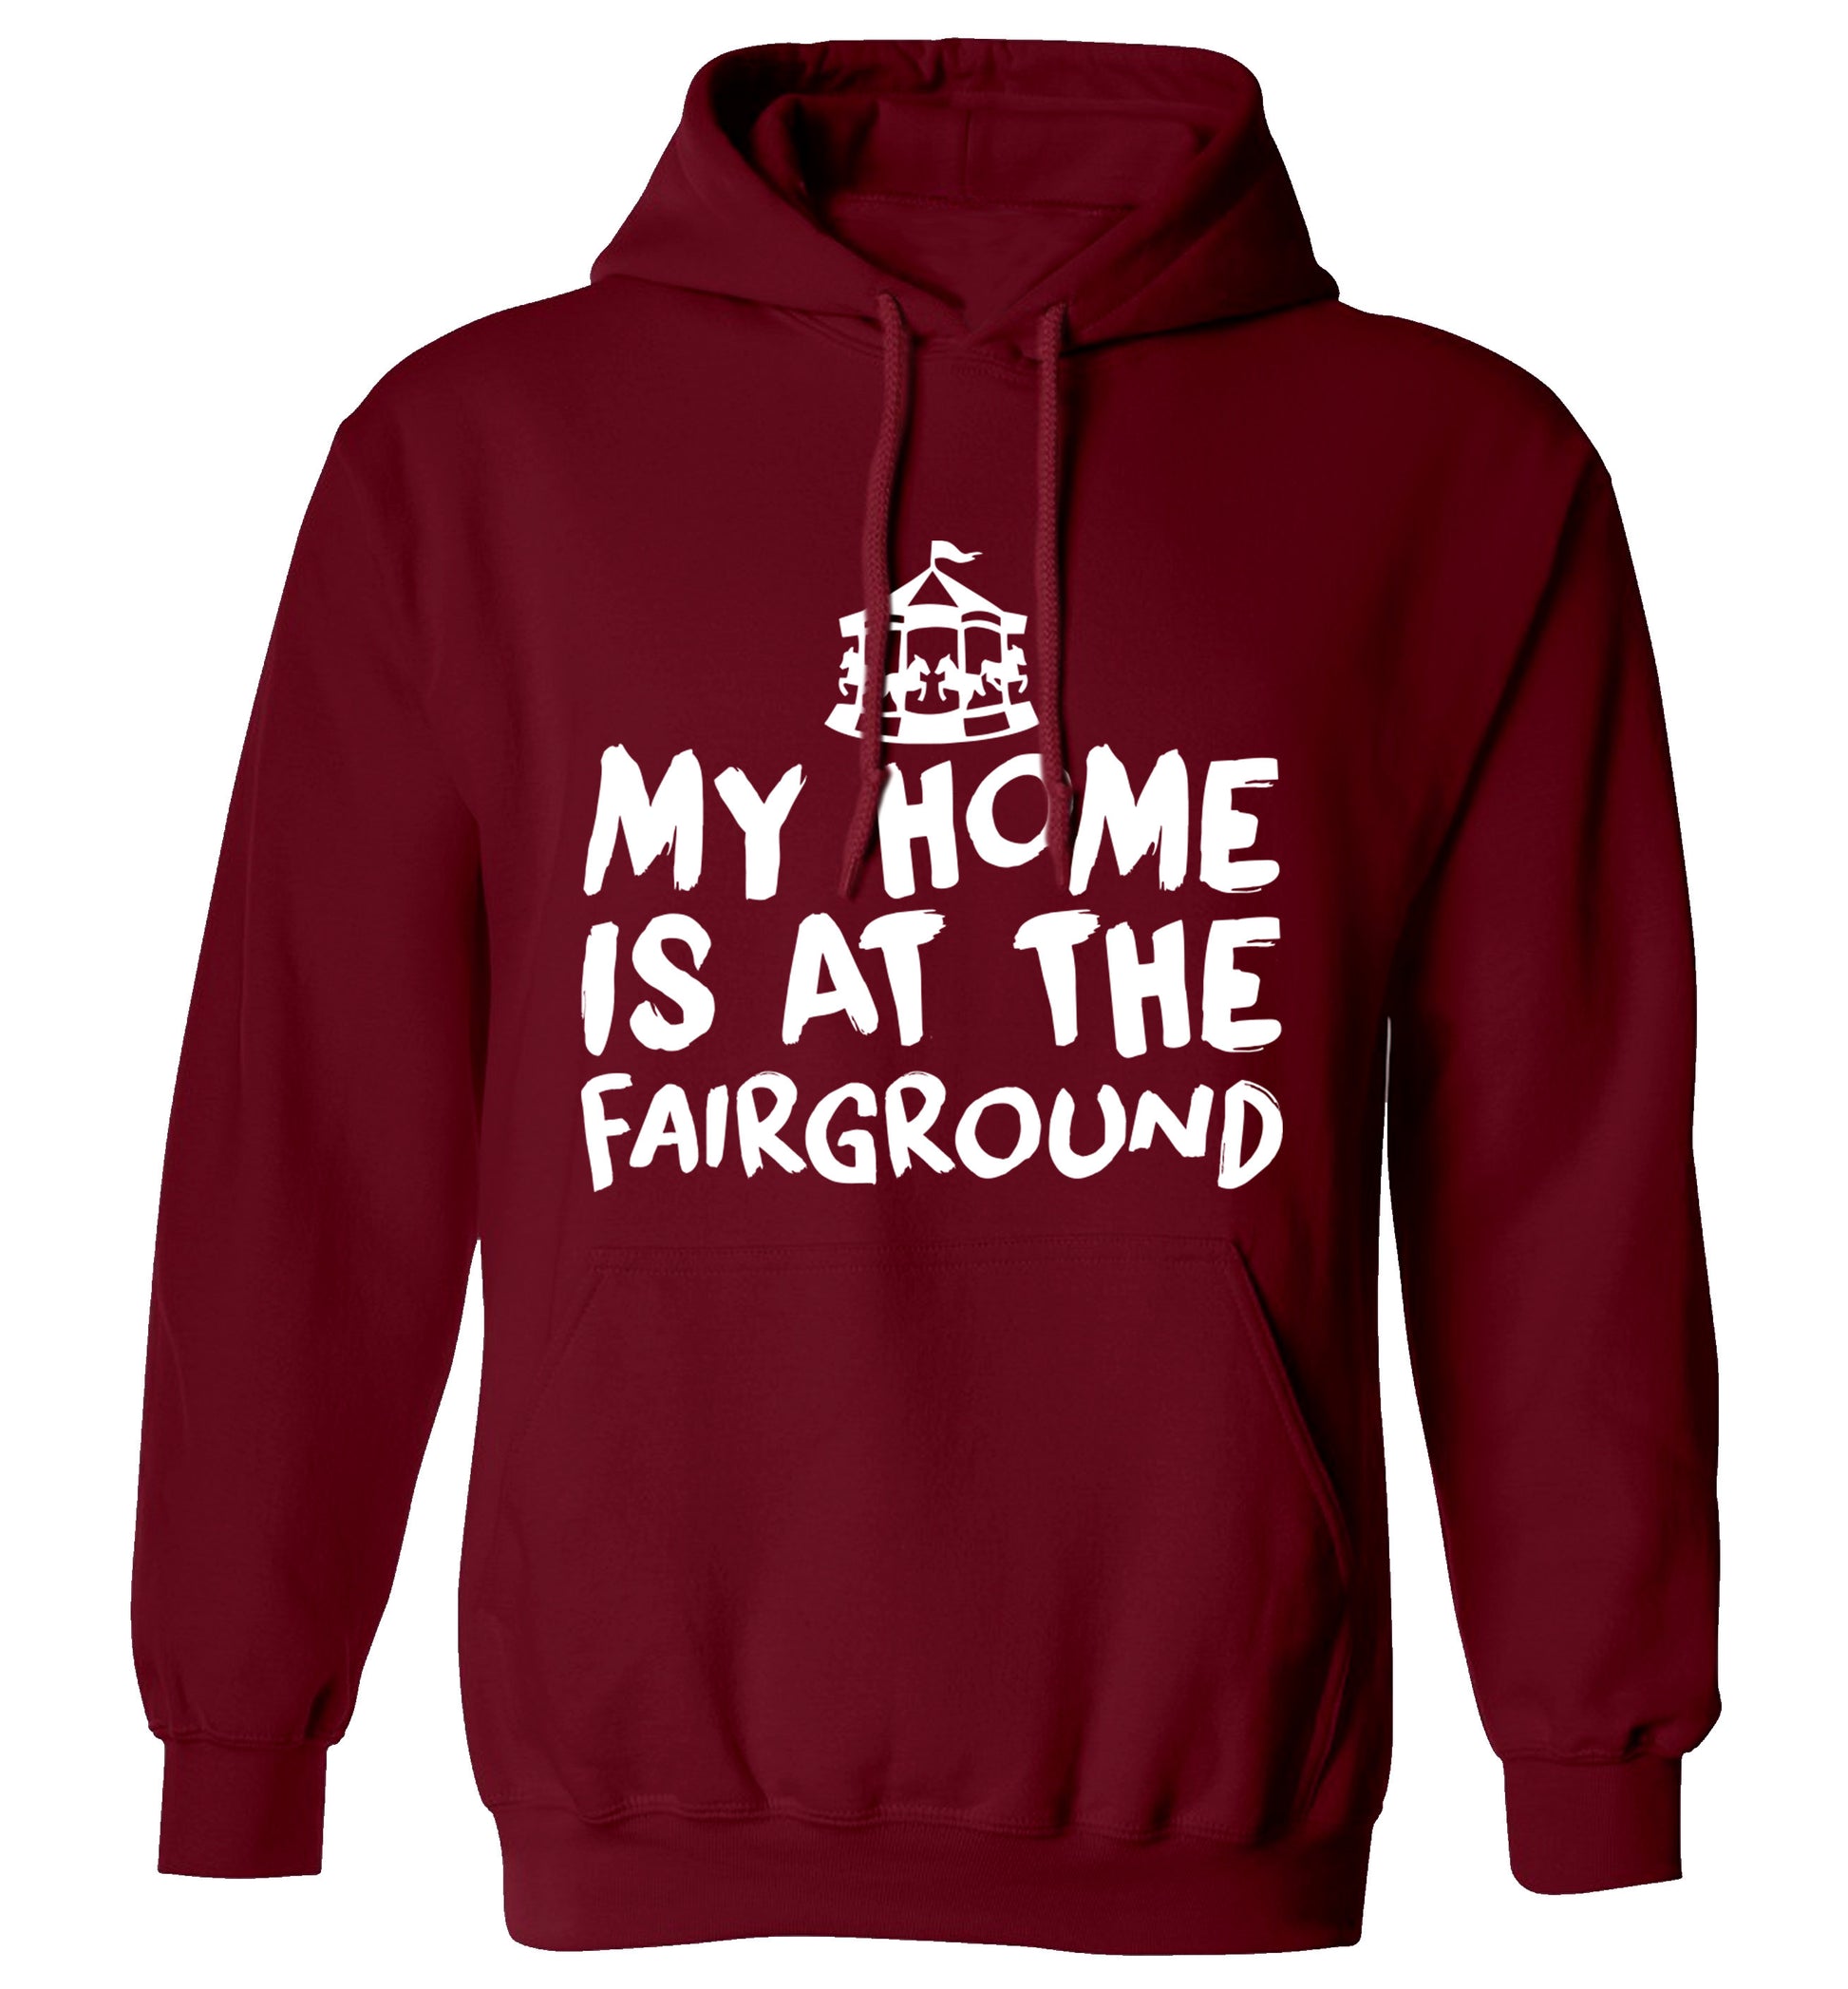 My home is at the fairground adults unisex maroon hoodie 2XL